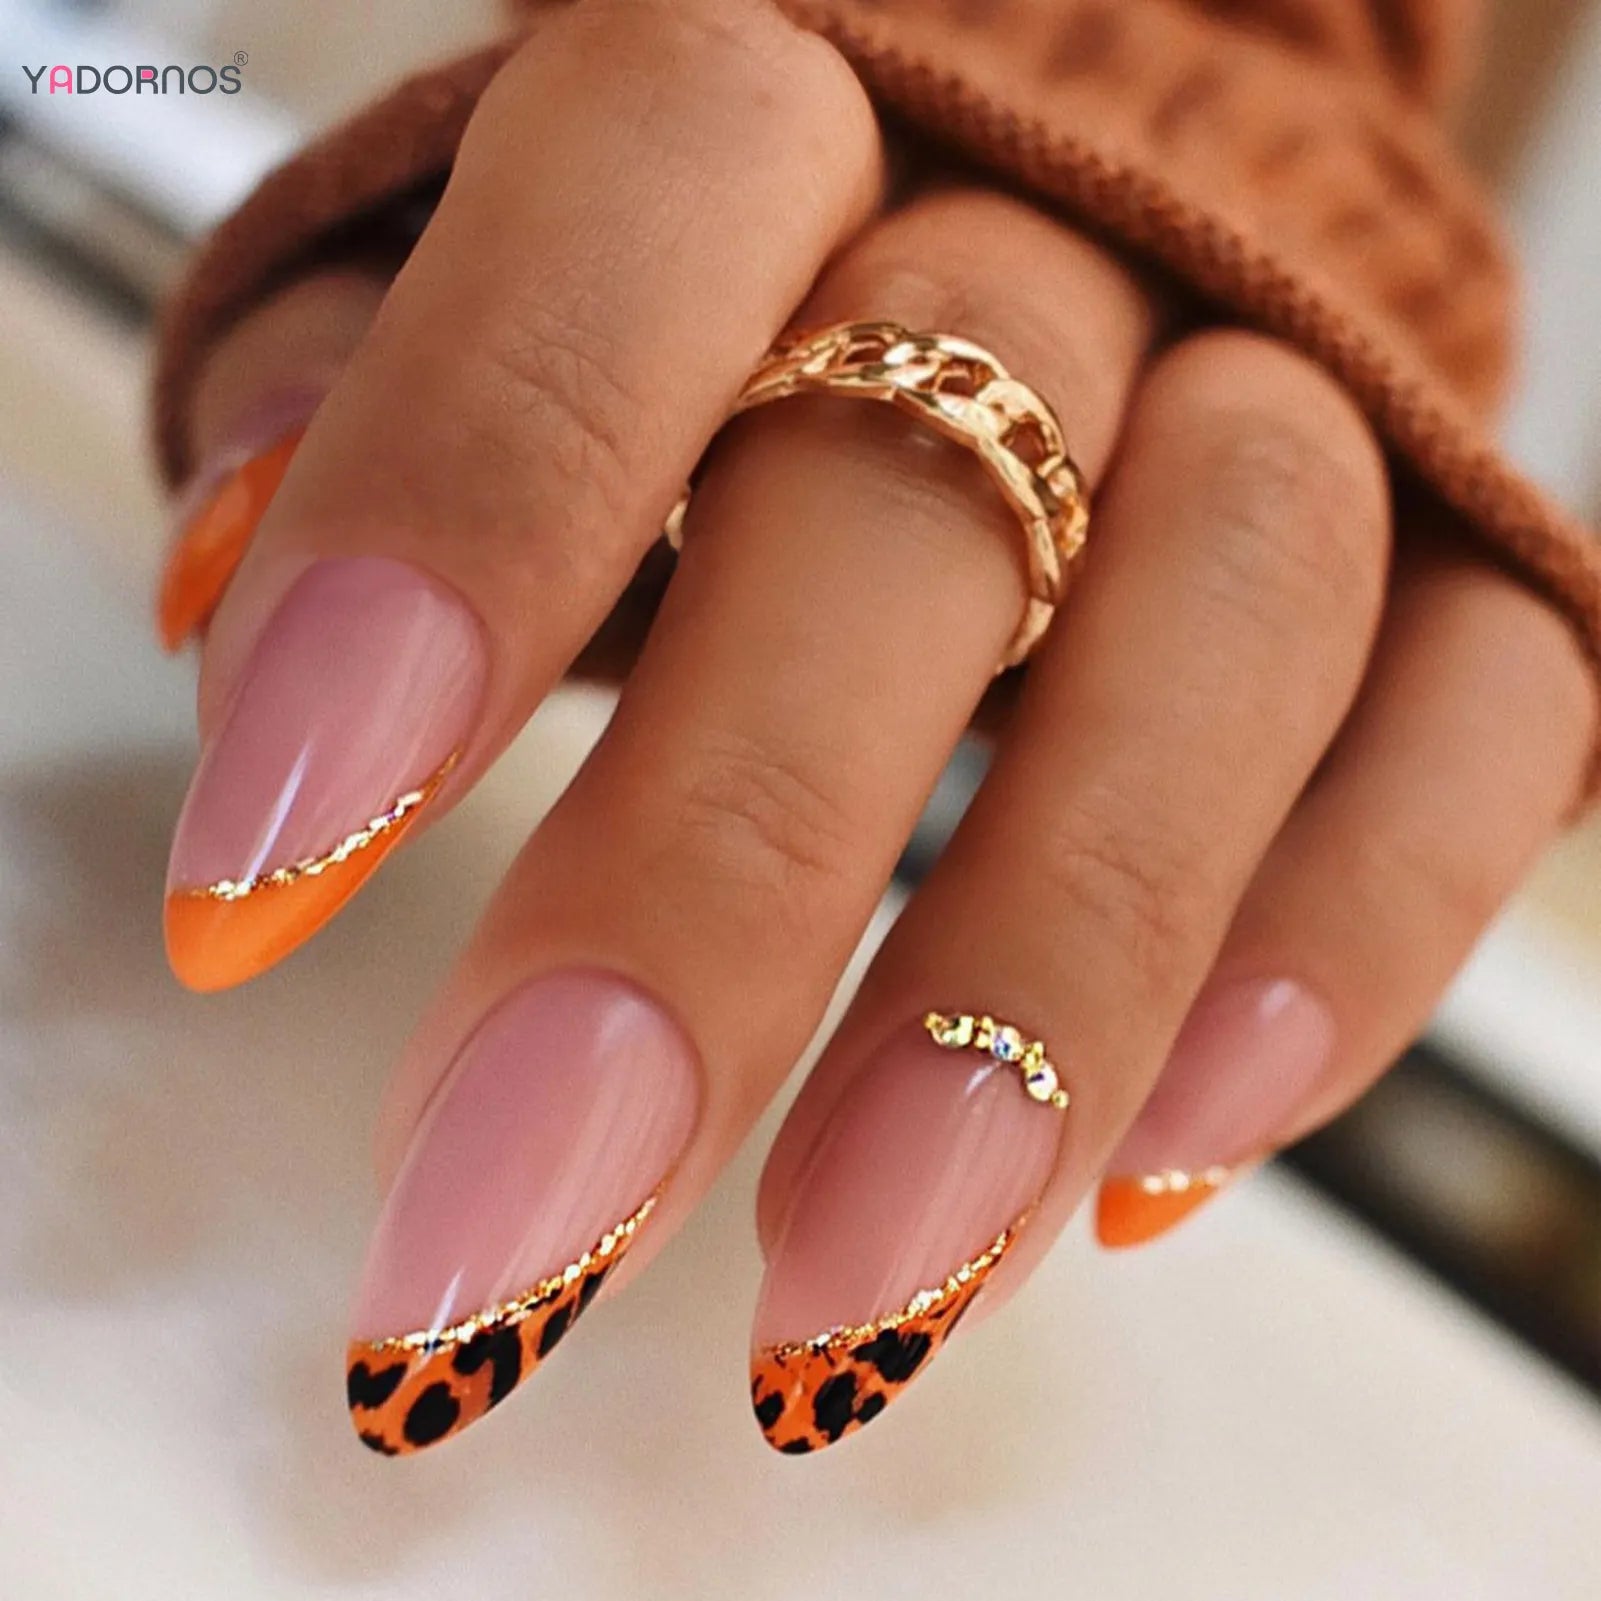 24Pcs Almond Fake Nails Orange Leopard Printed Press on Nails Full Cover Acrylic False Nails Patch for Women DIY Manicure Art